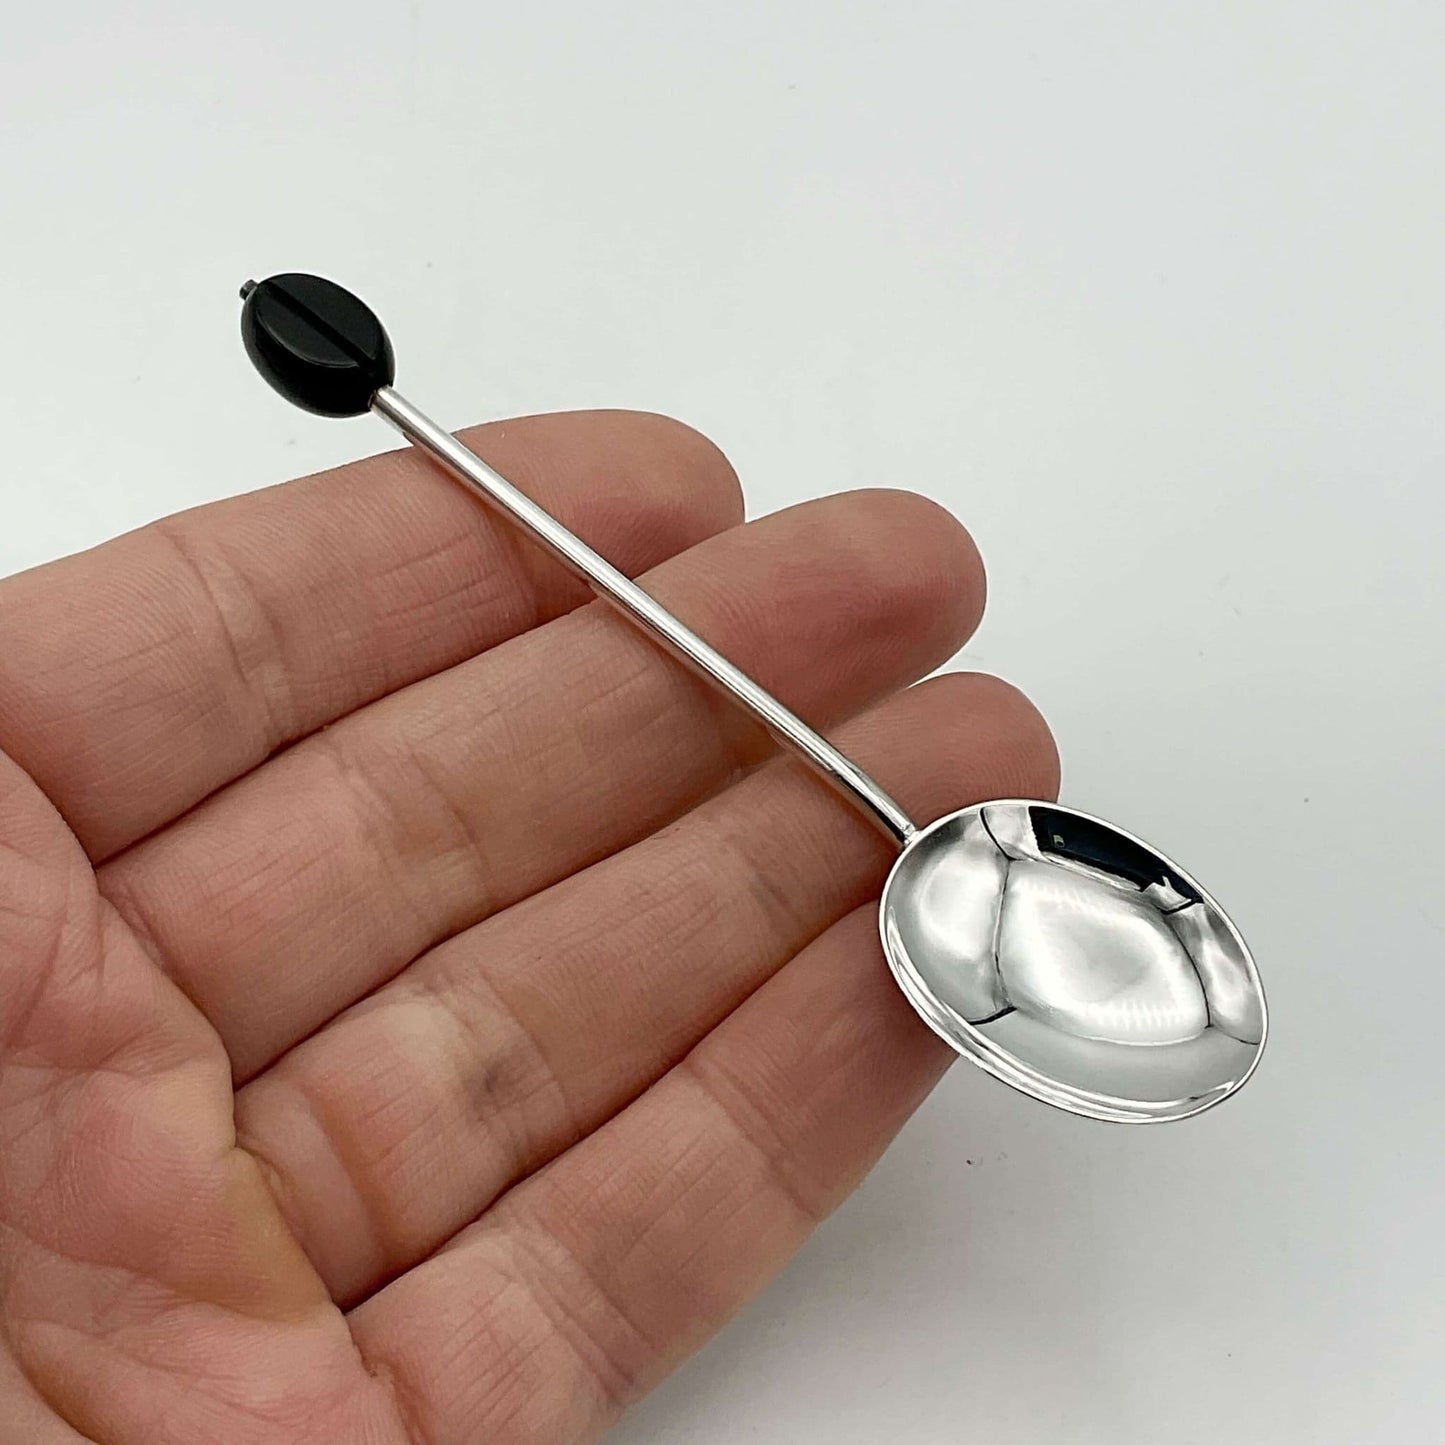 A beautiful silver coffee spoon with coffee bean finial held in a hand